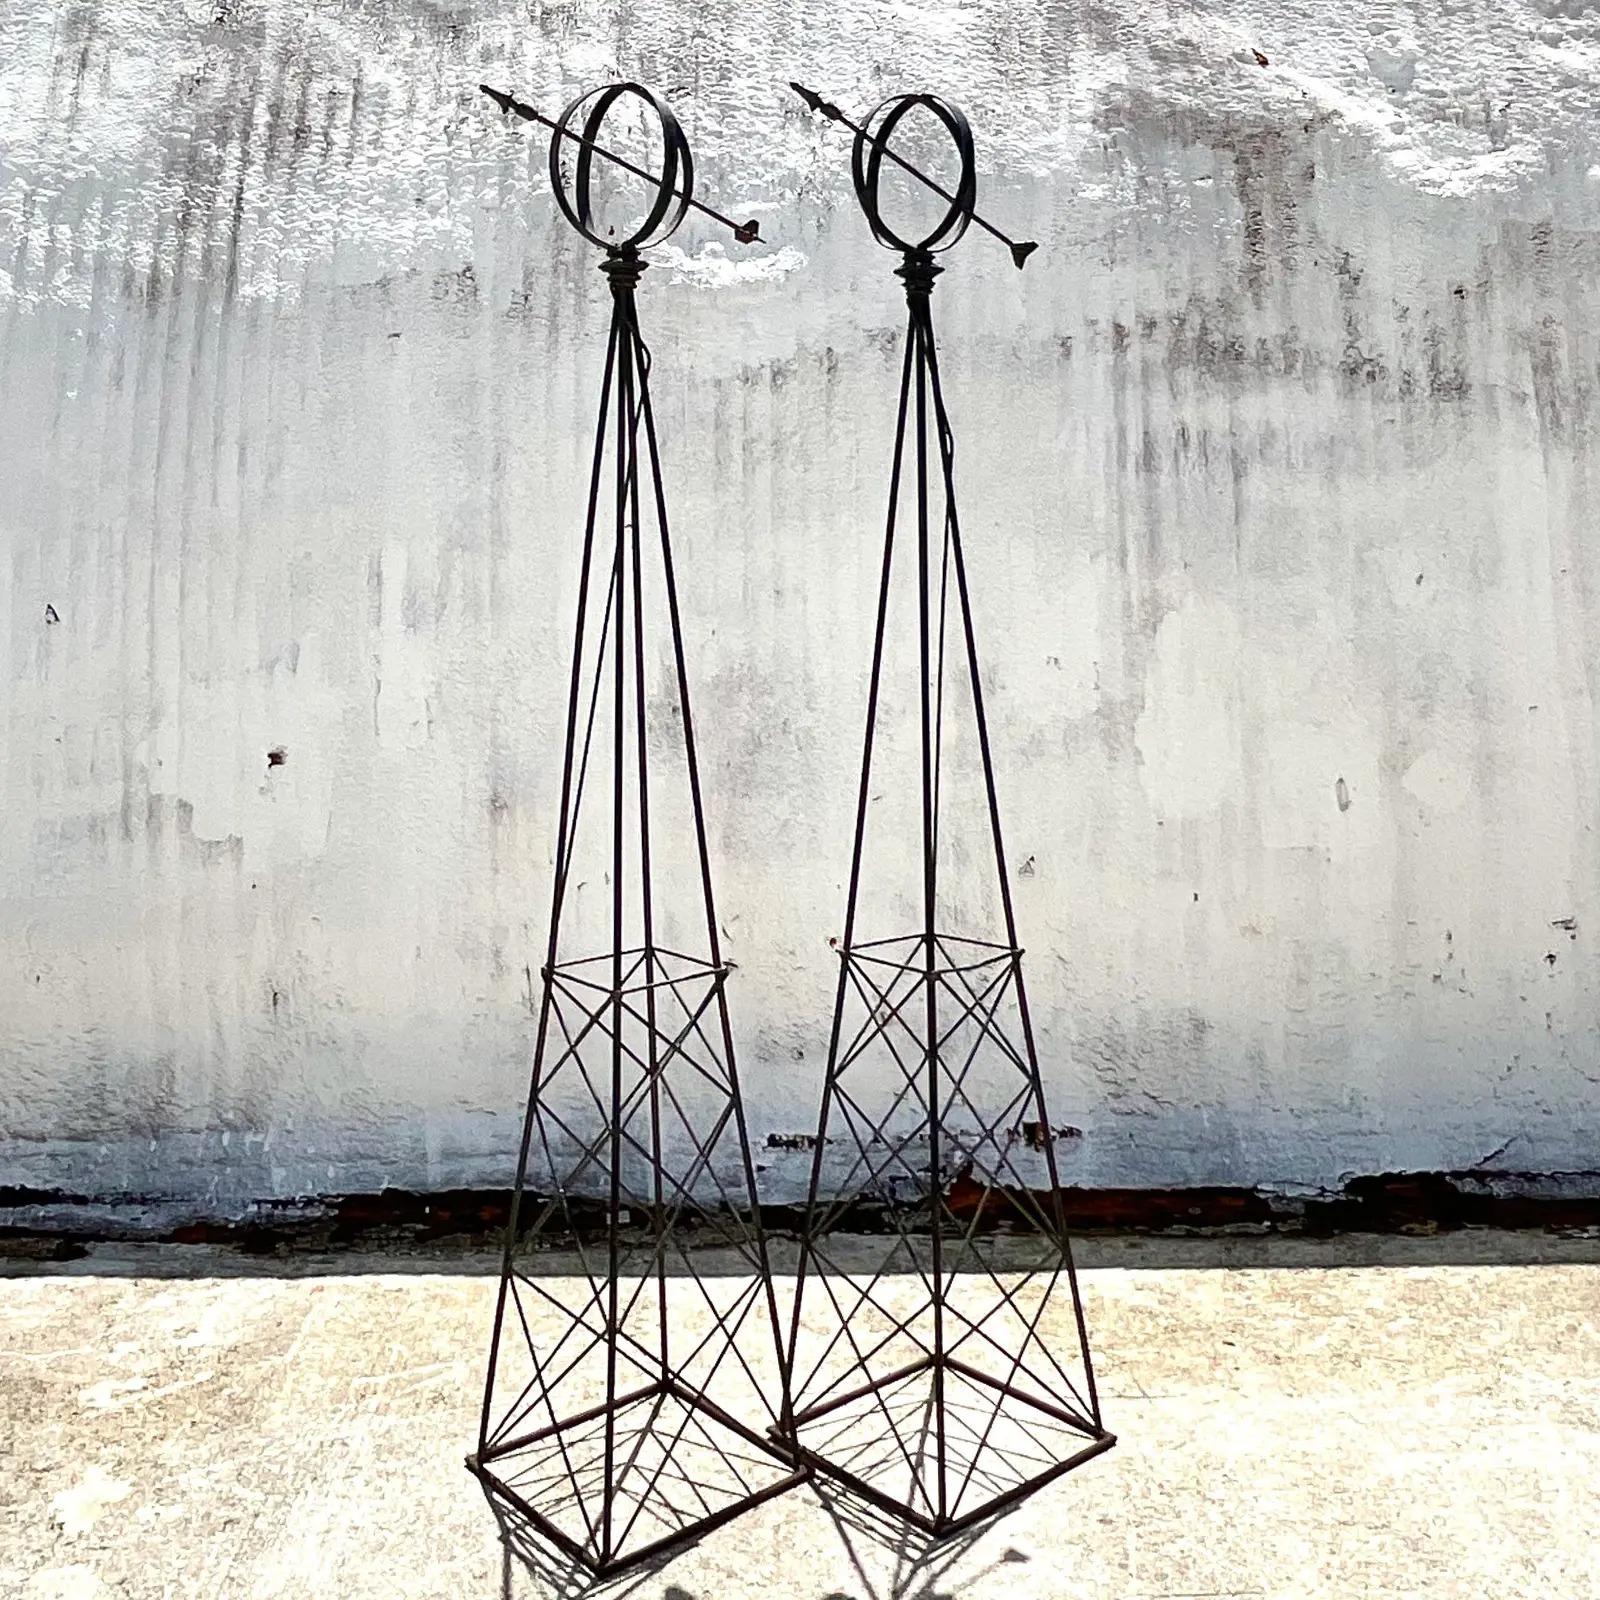 North American Vintage Regency Monumental Wrought Iron Sundials, a Pair